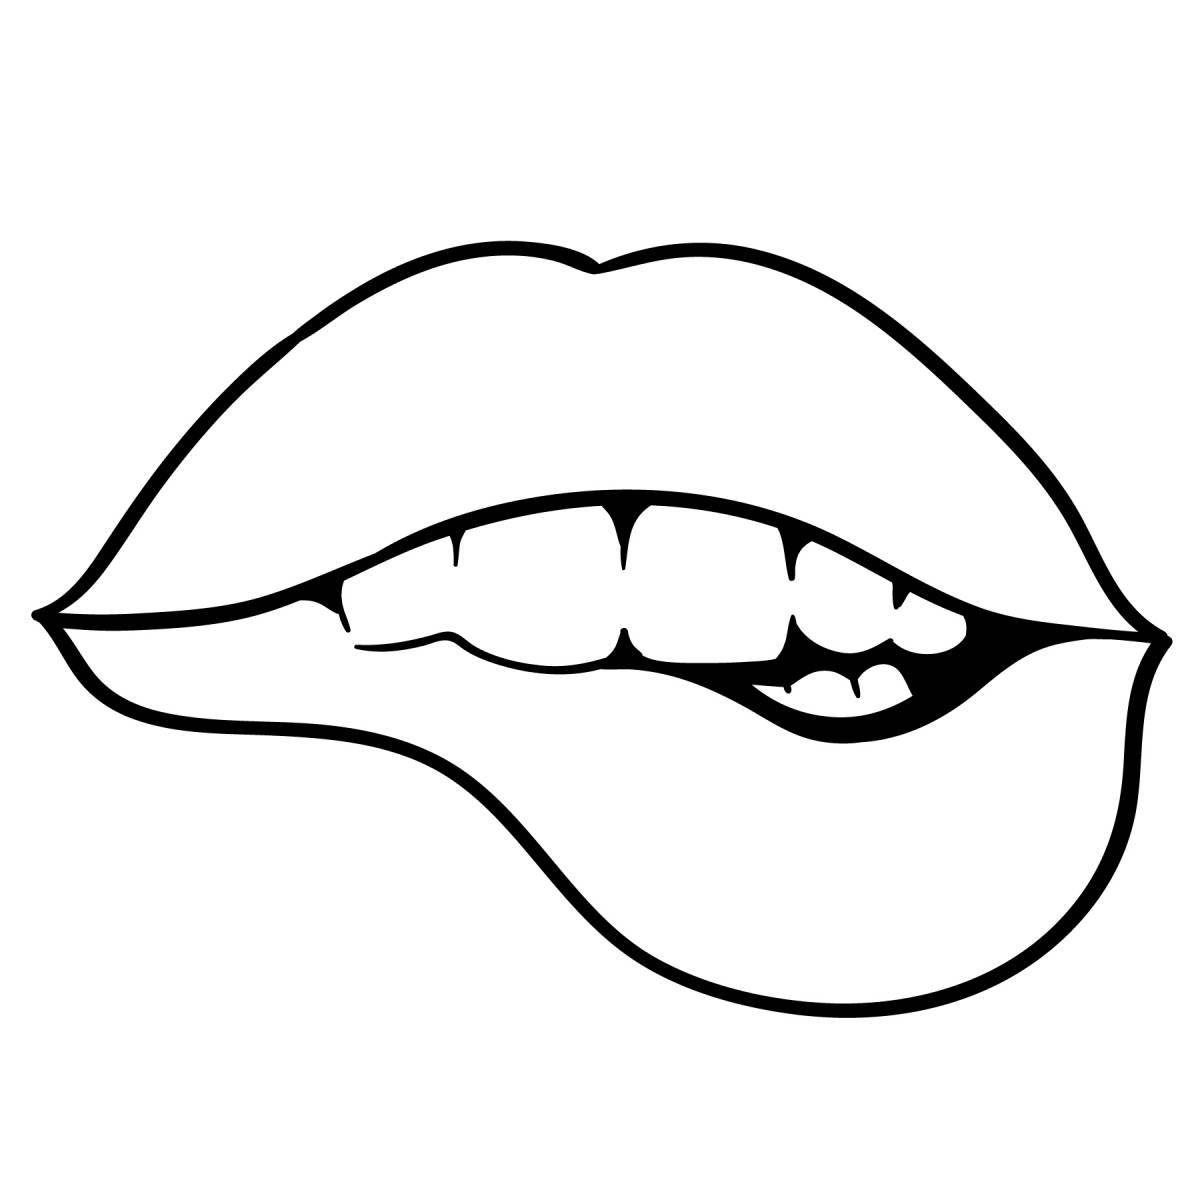 Adorable lips coloring book for kids